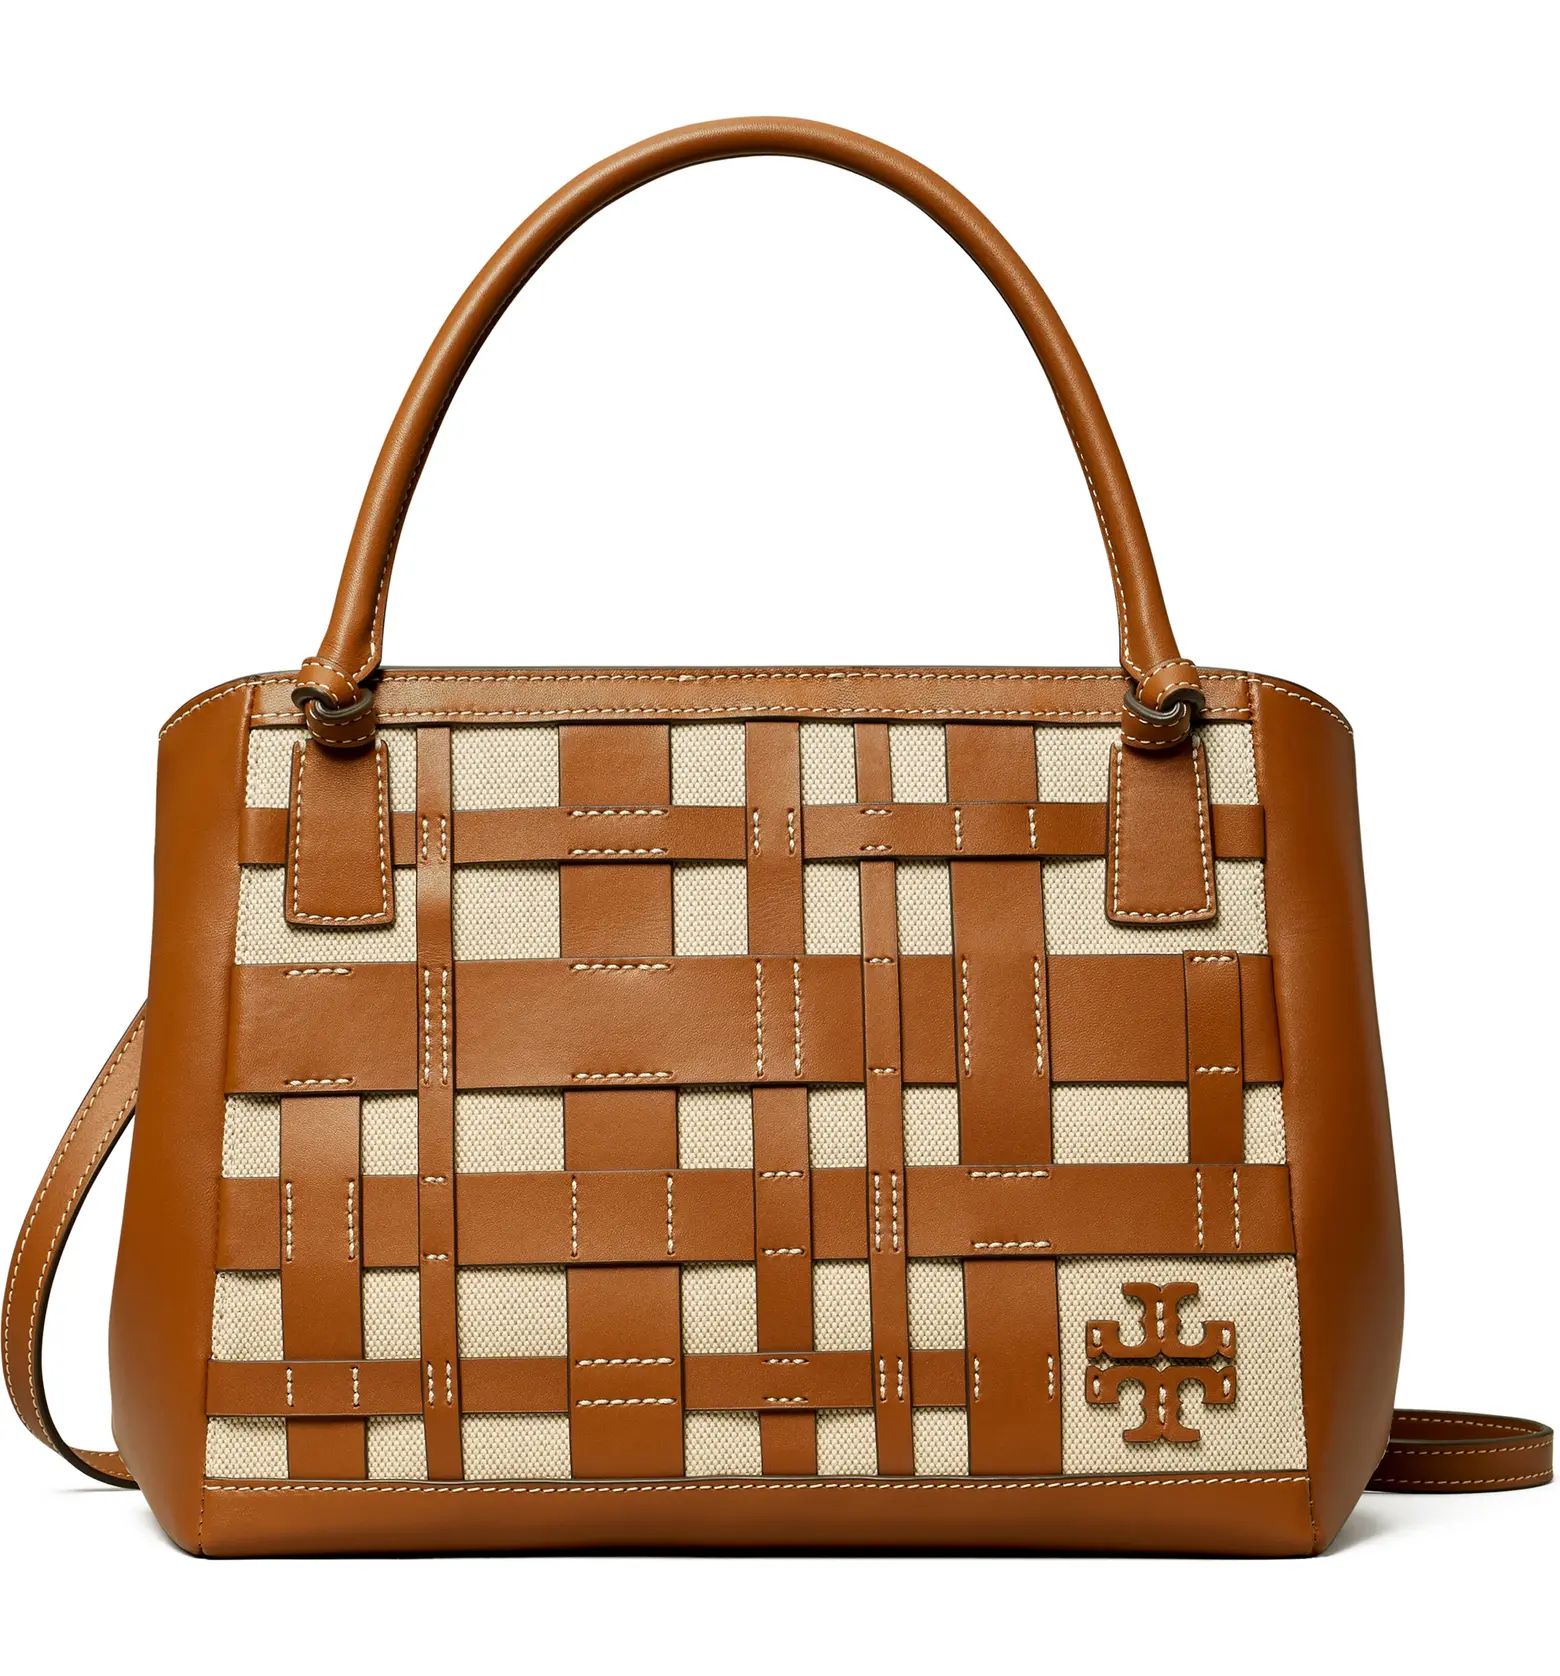 McGraw Canvas & Leather Woven Satchel | Nordstrom